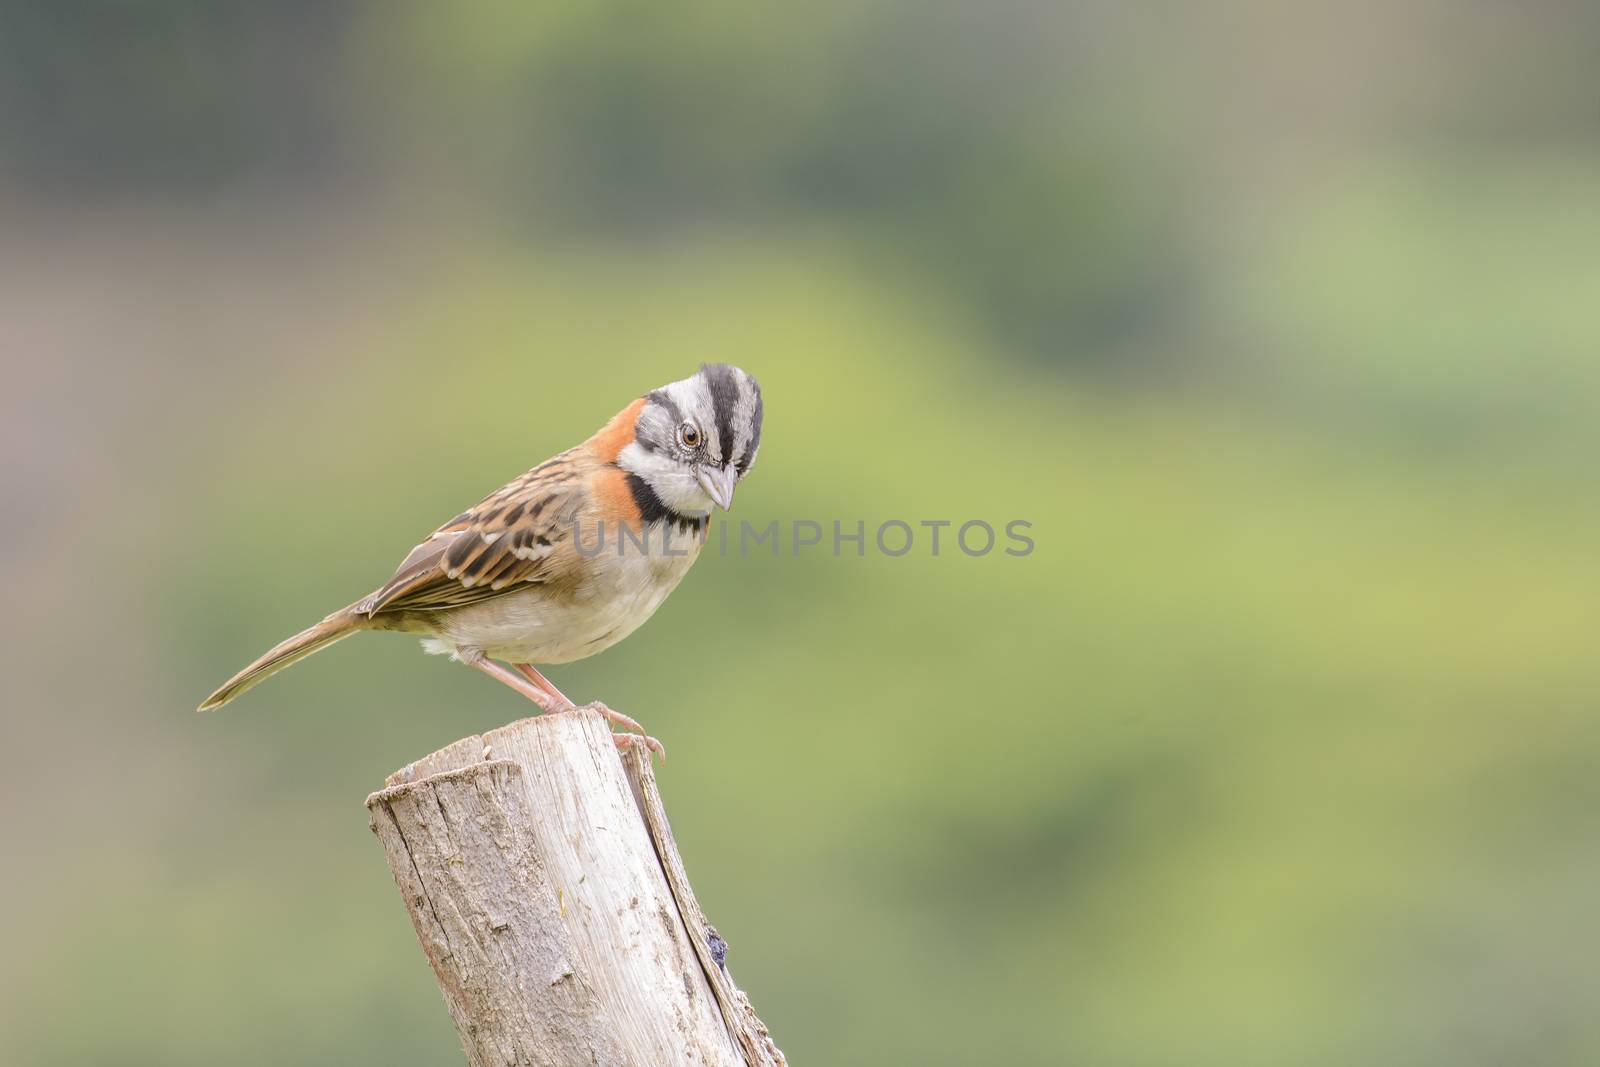 Rufous-collared sparrow sits atop a fence post as photographed in Costa Rica.